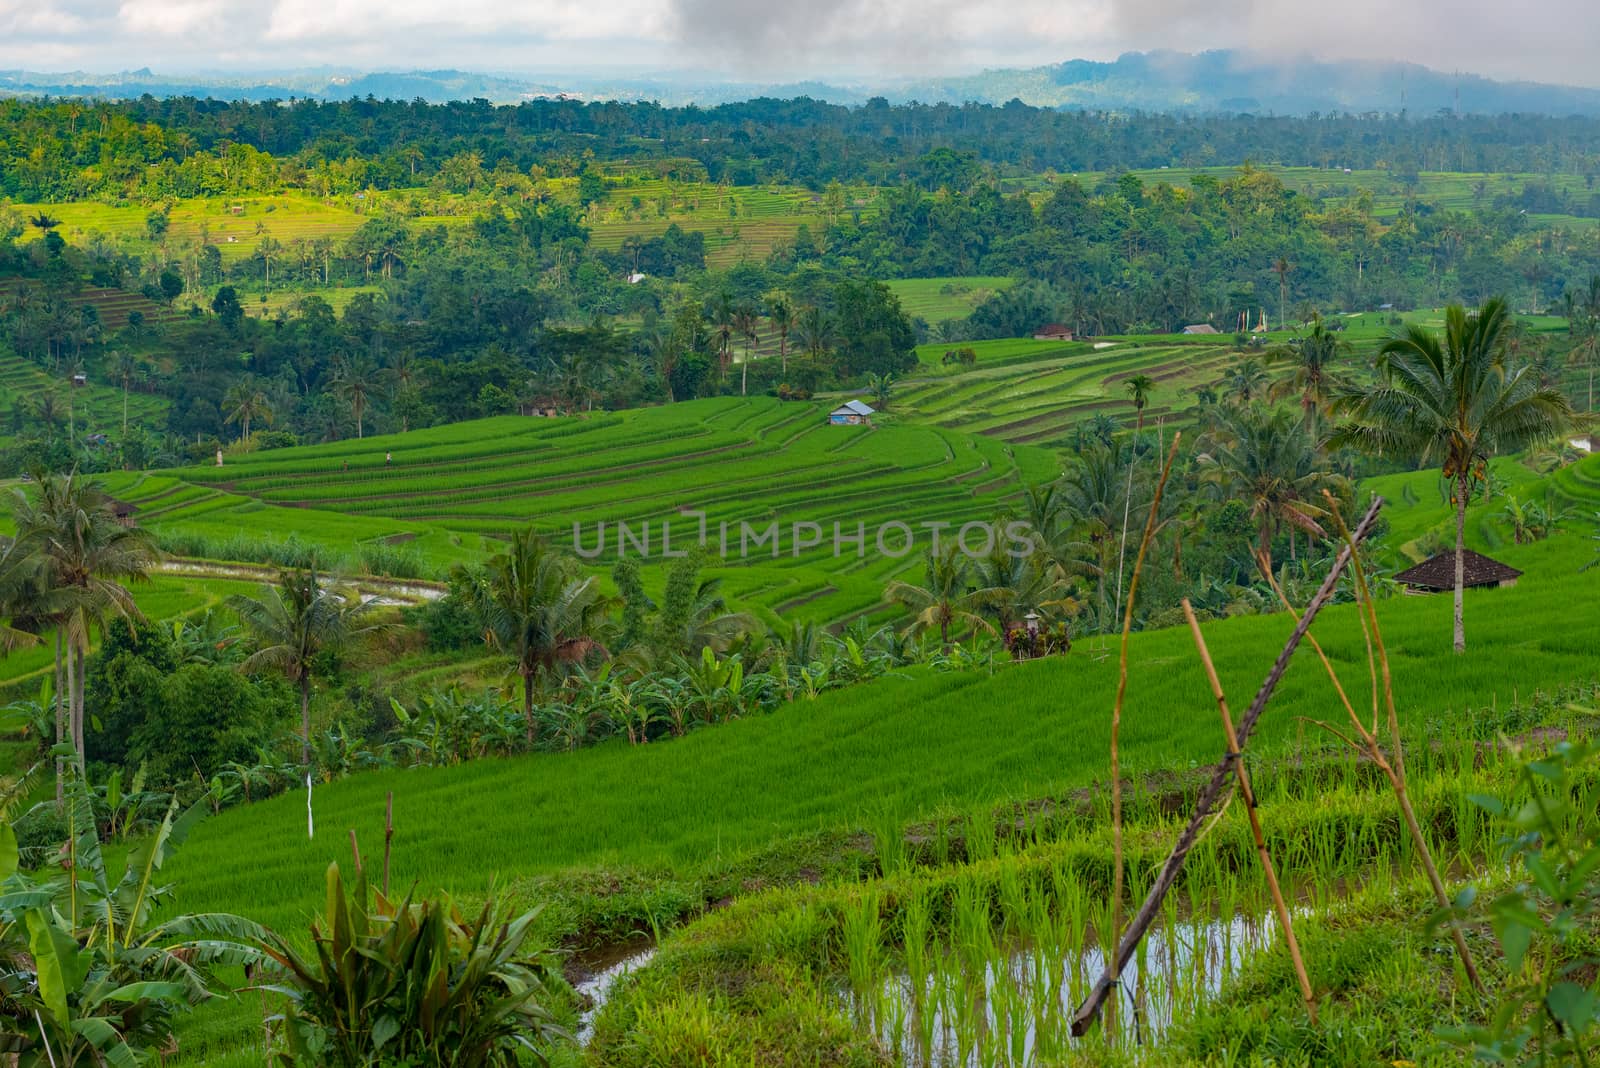 Overlooking terraced rice paddies in Java Indonesia. A UNESCO cultural heritage site.